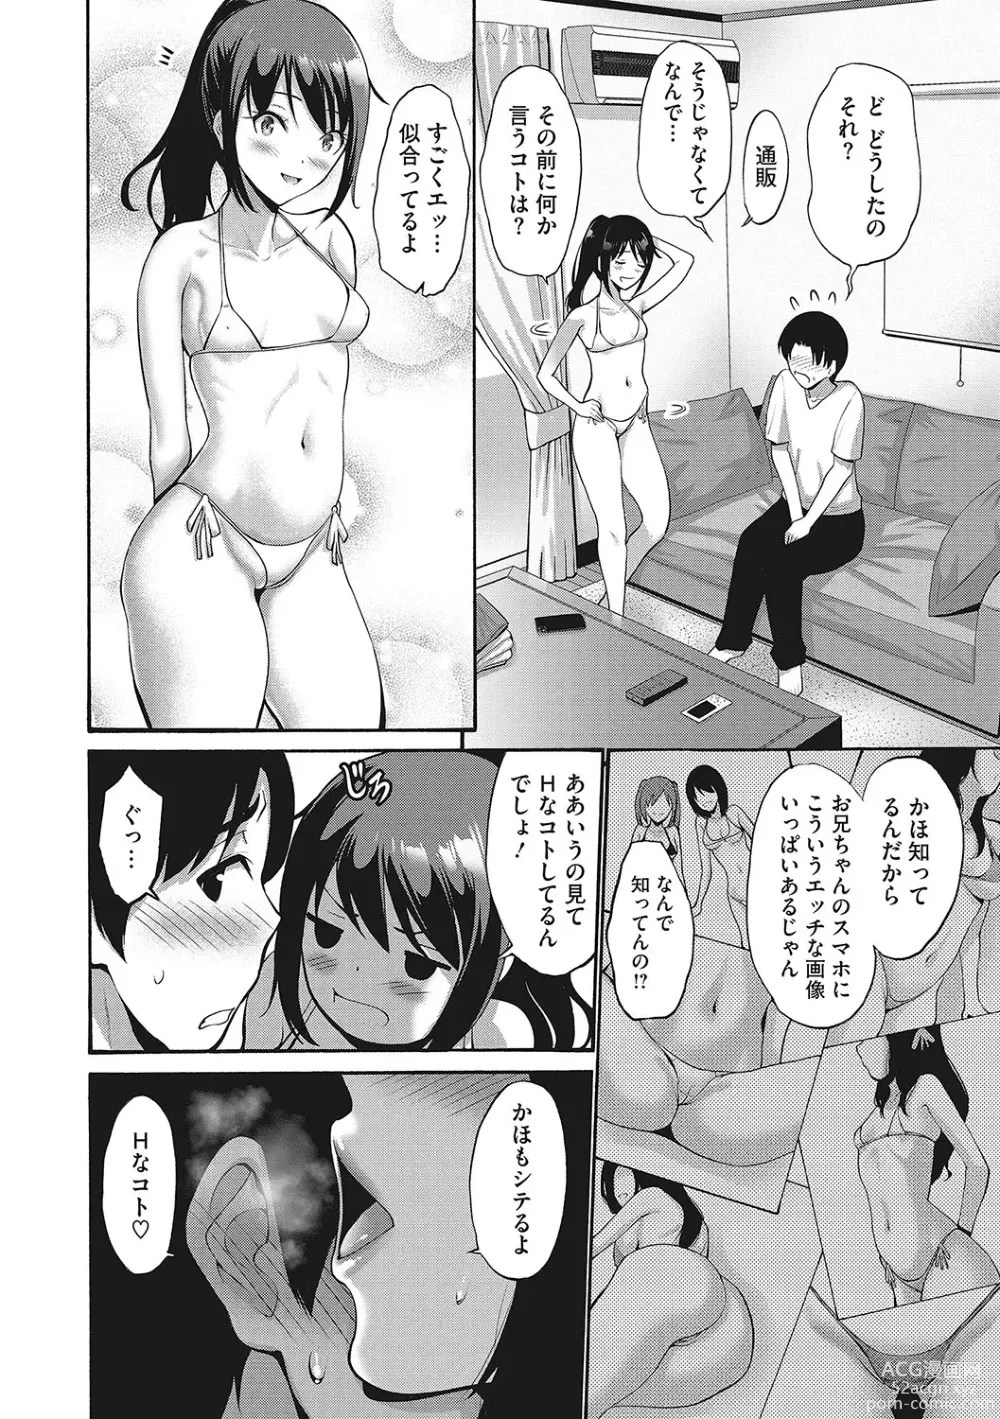 Page 33 of manga LQ -Little Queen- Vol. 54